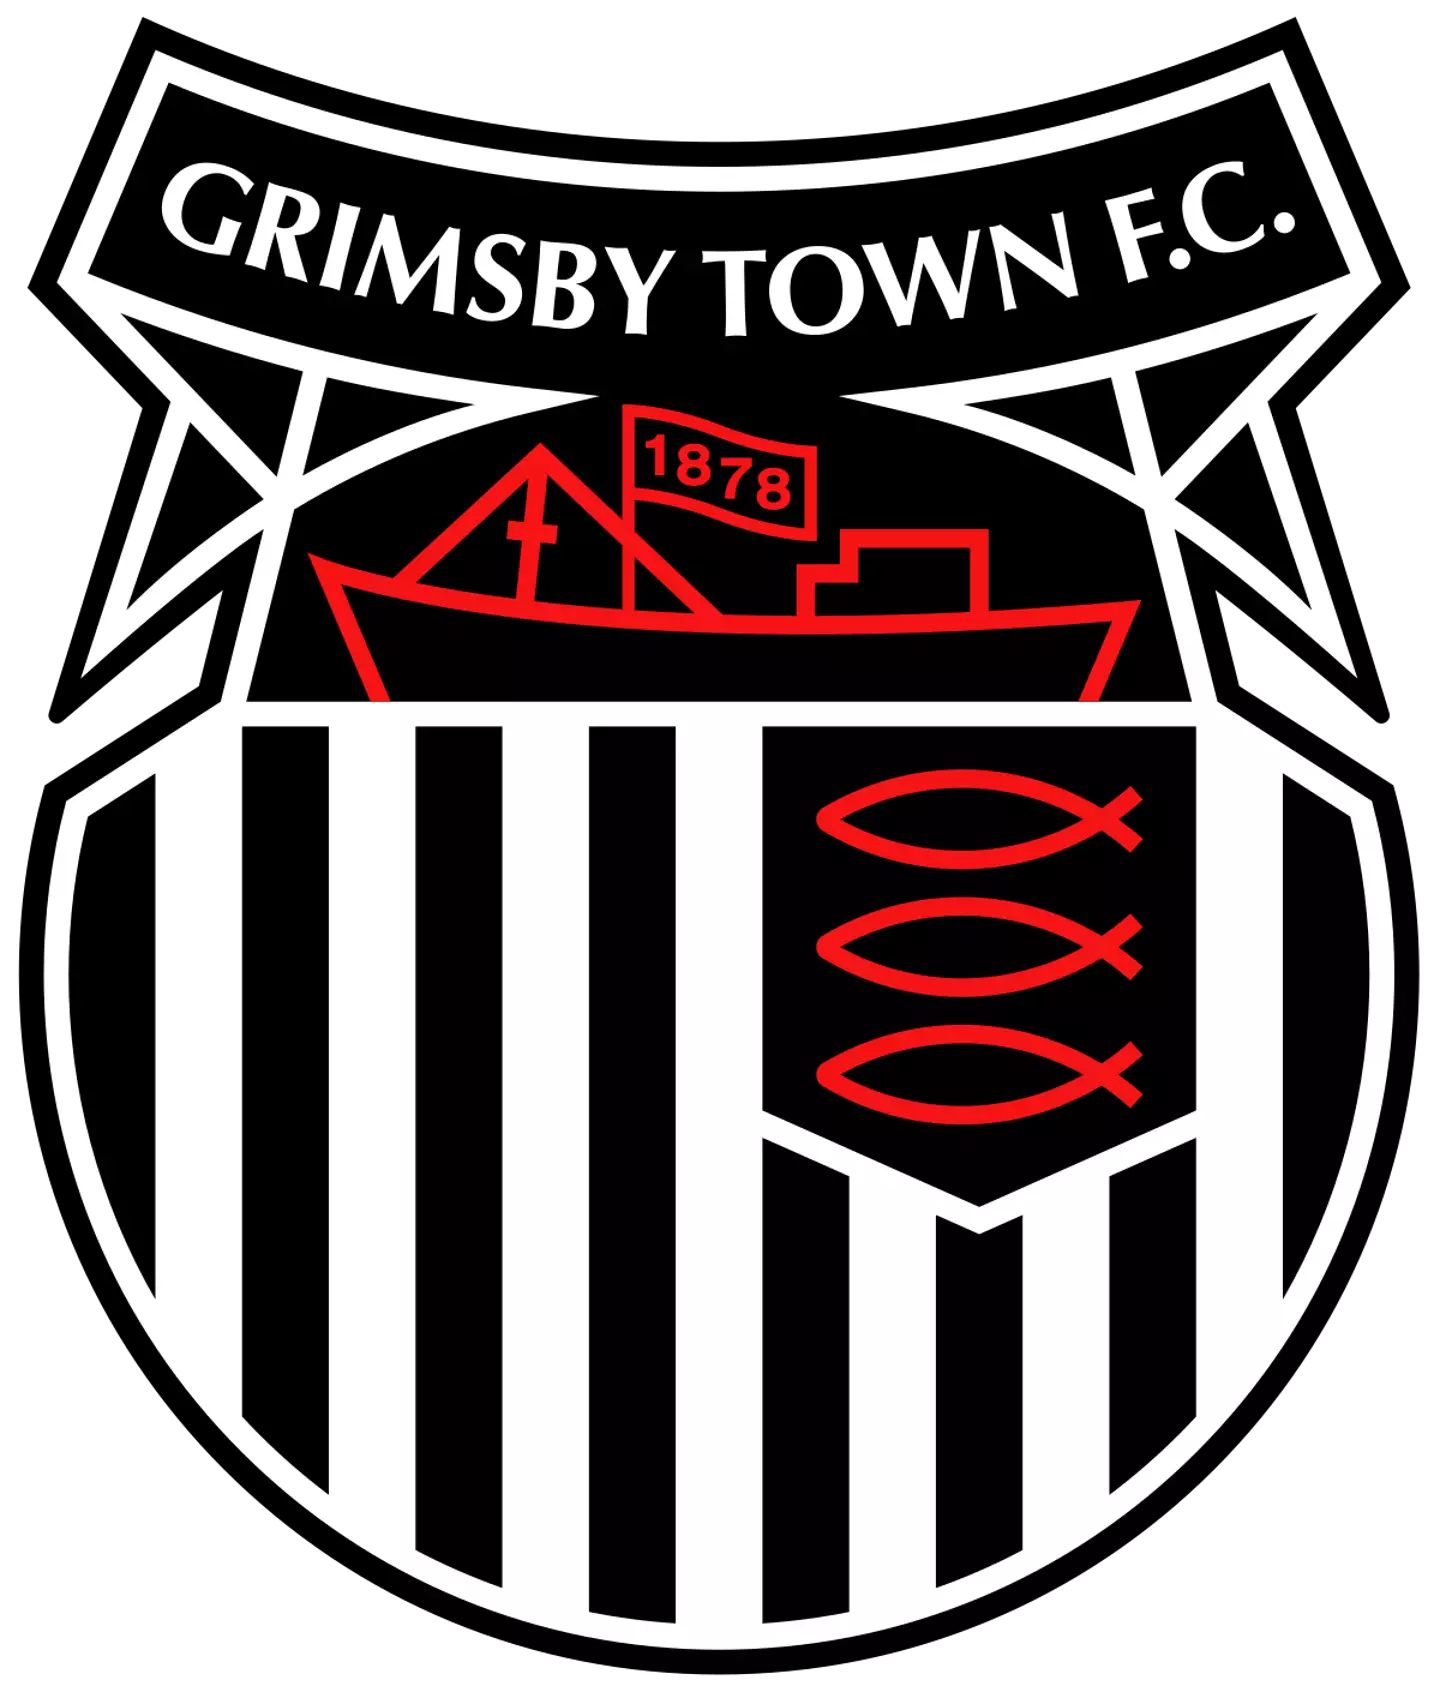 It's understood Grimsby Town’s trawler is not associated with slavery.